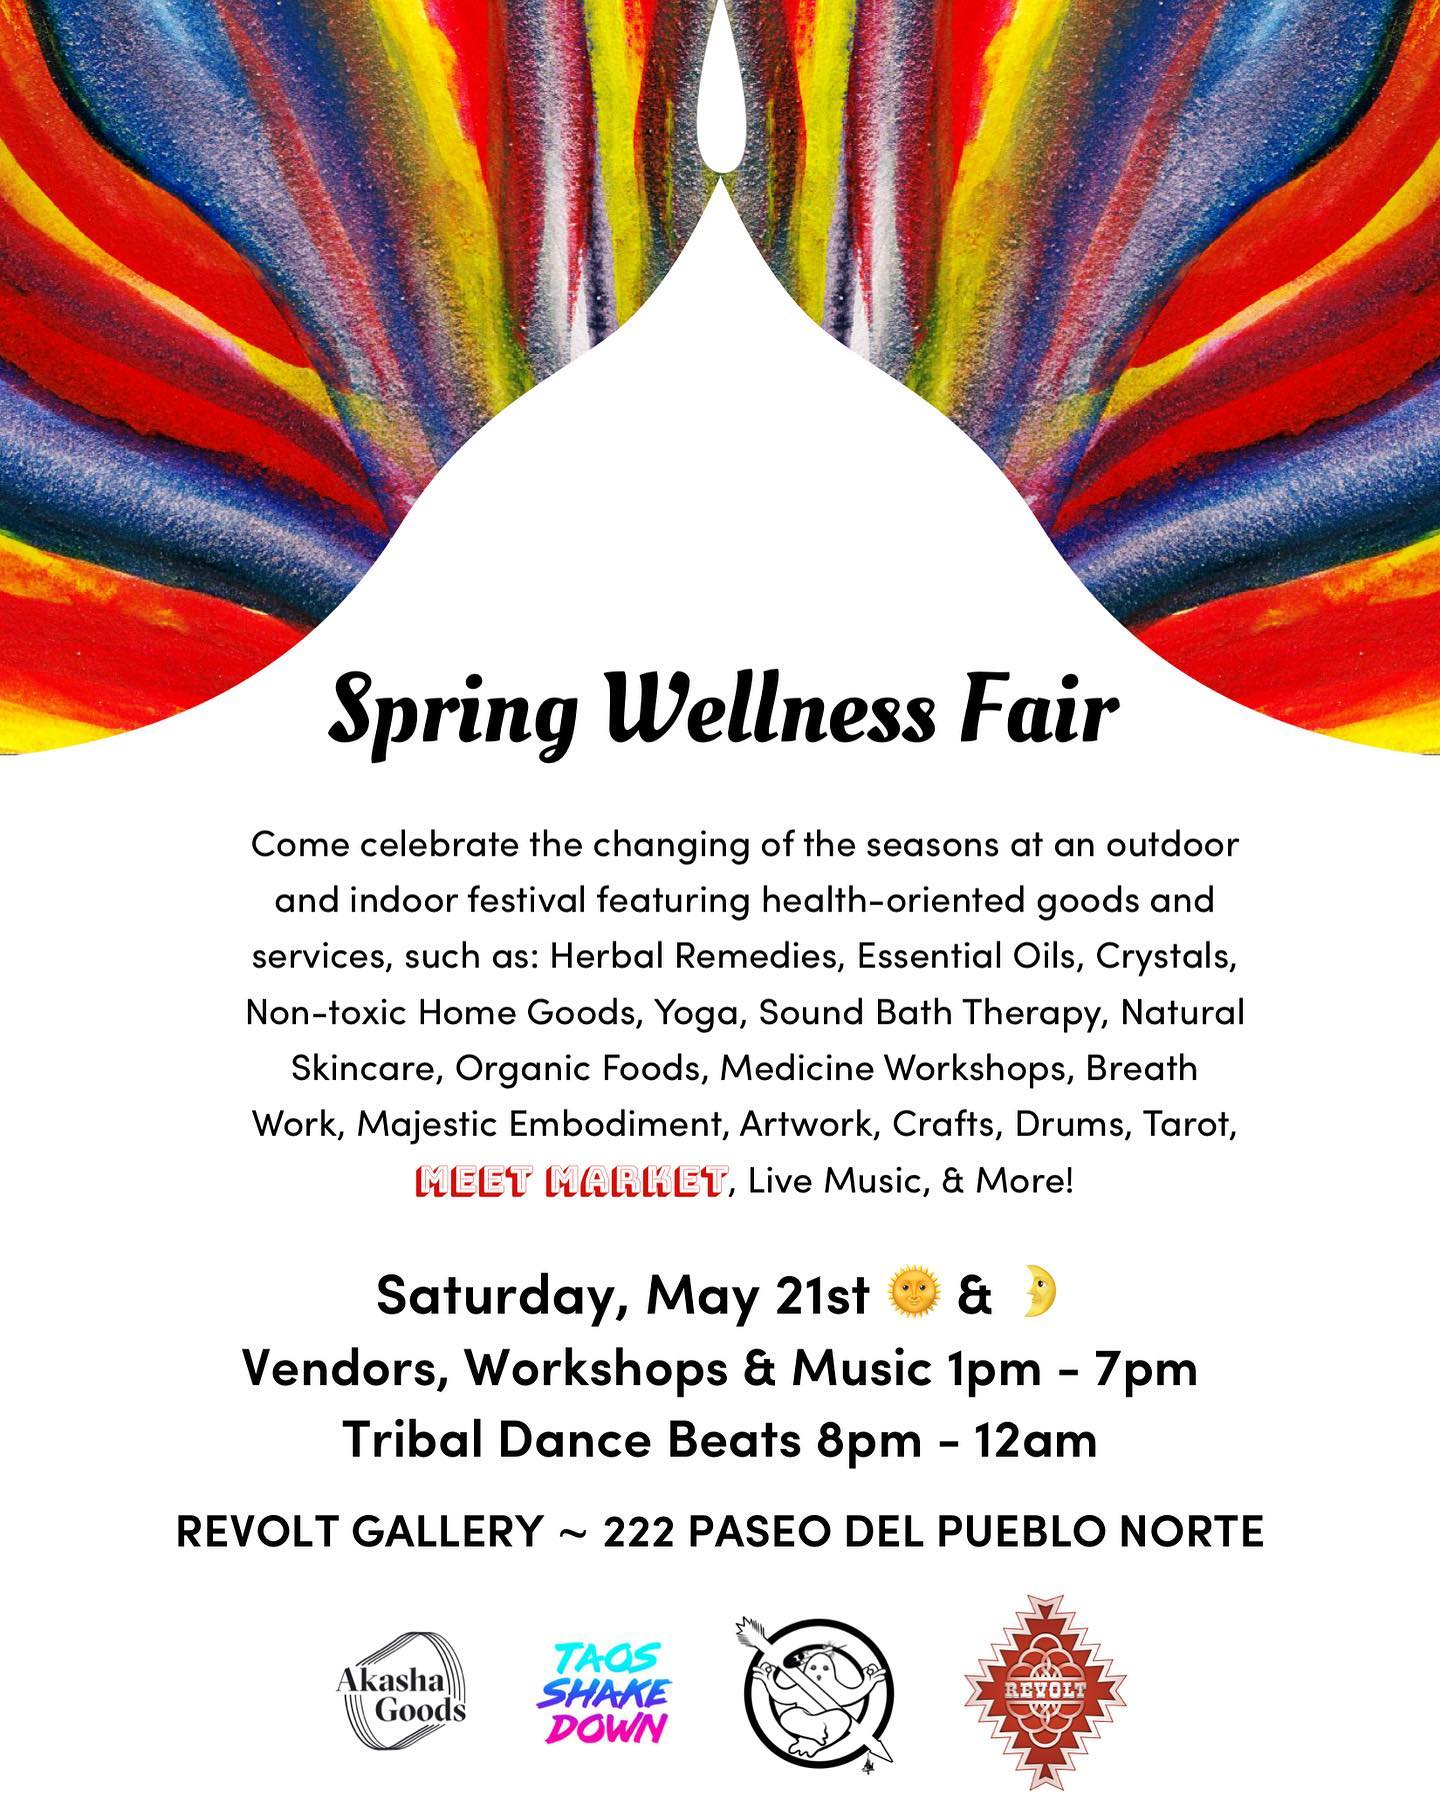 We are excited to announce the 
💐 Spring Wellness Fair 🌿 
~
🌿Saturday, May 21st 🌞 & 🌛
Vendors, Workshops & Music 1pm - 7